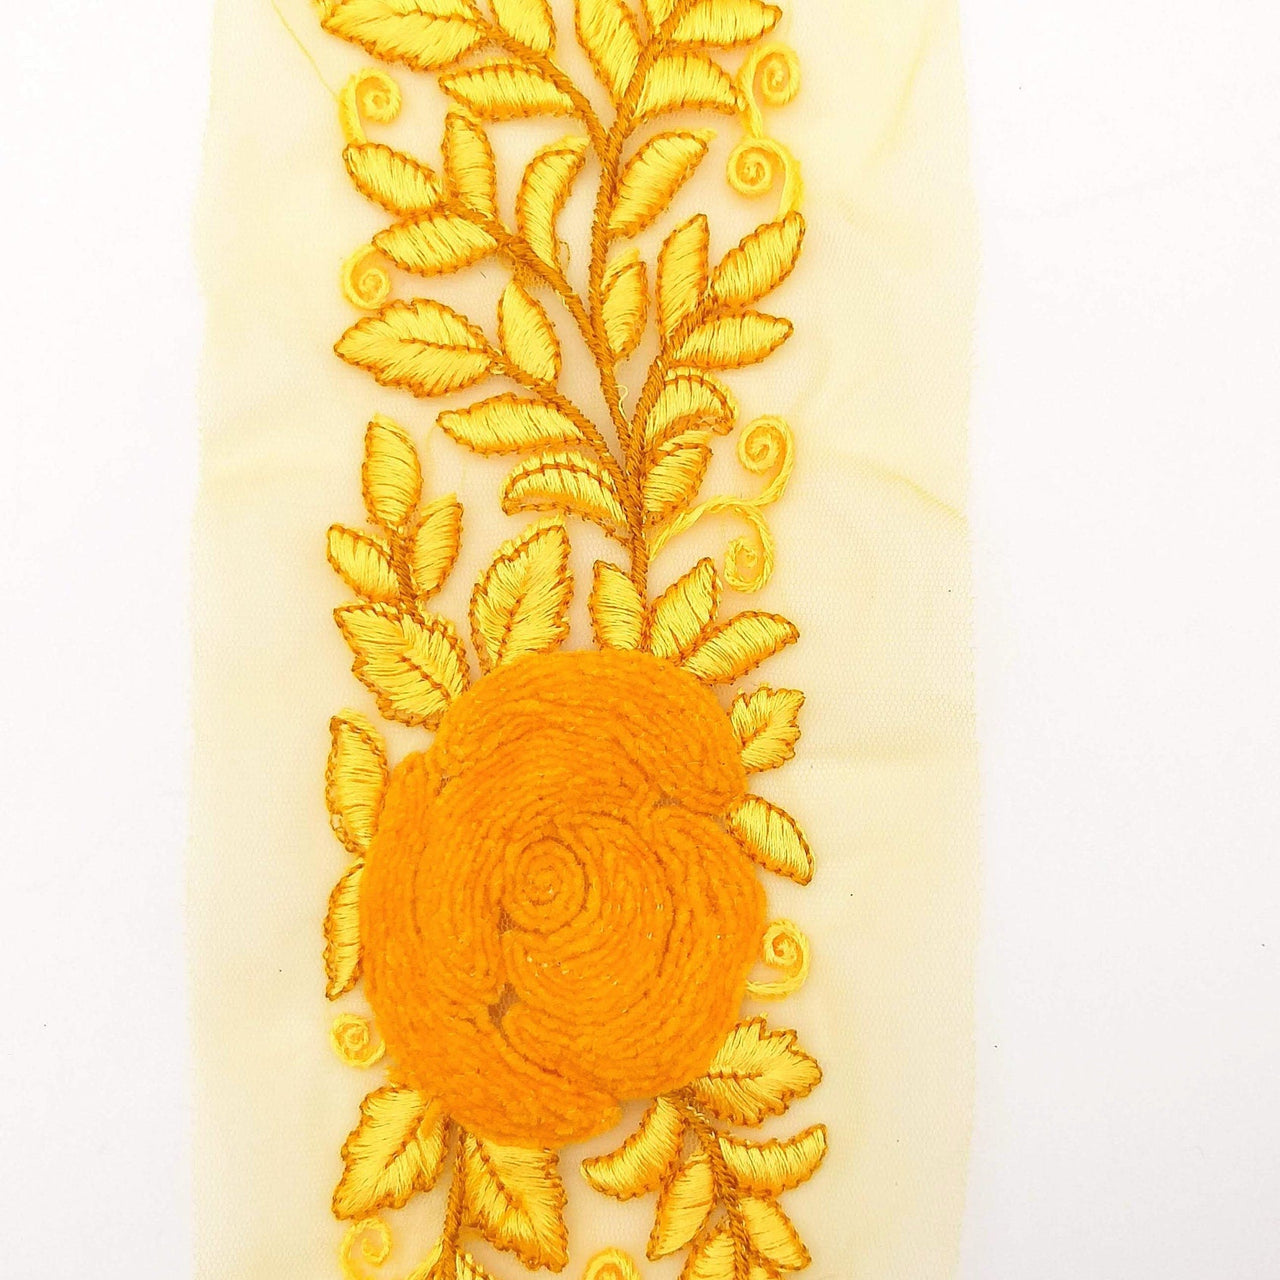 Orange Yellow Soft Net Fabric Lace Trim with Floral Embroidery, Lace Trim, Sari Border